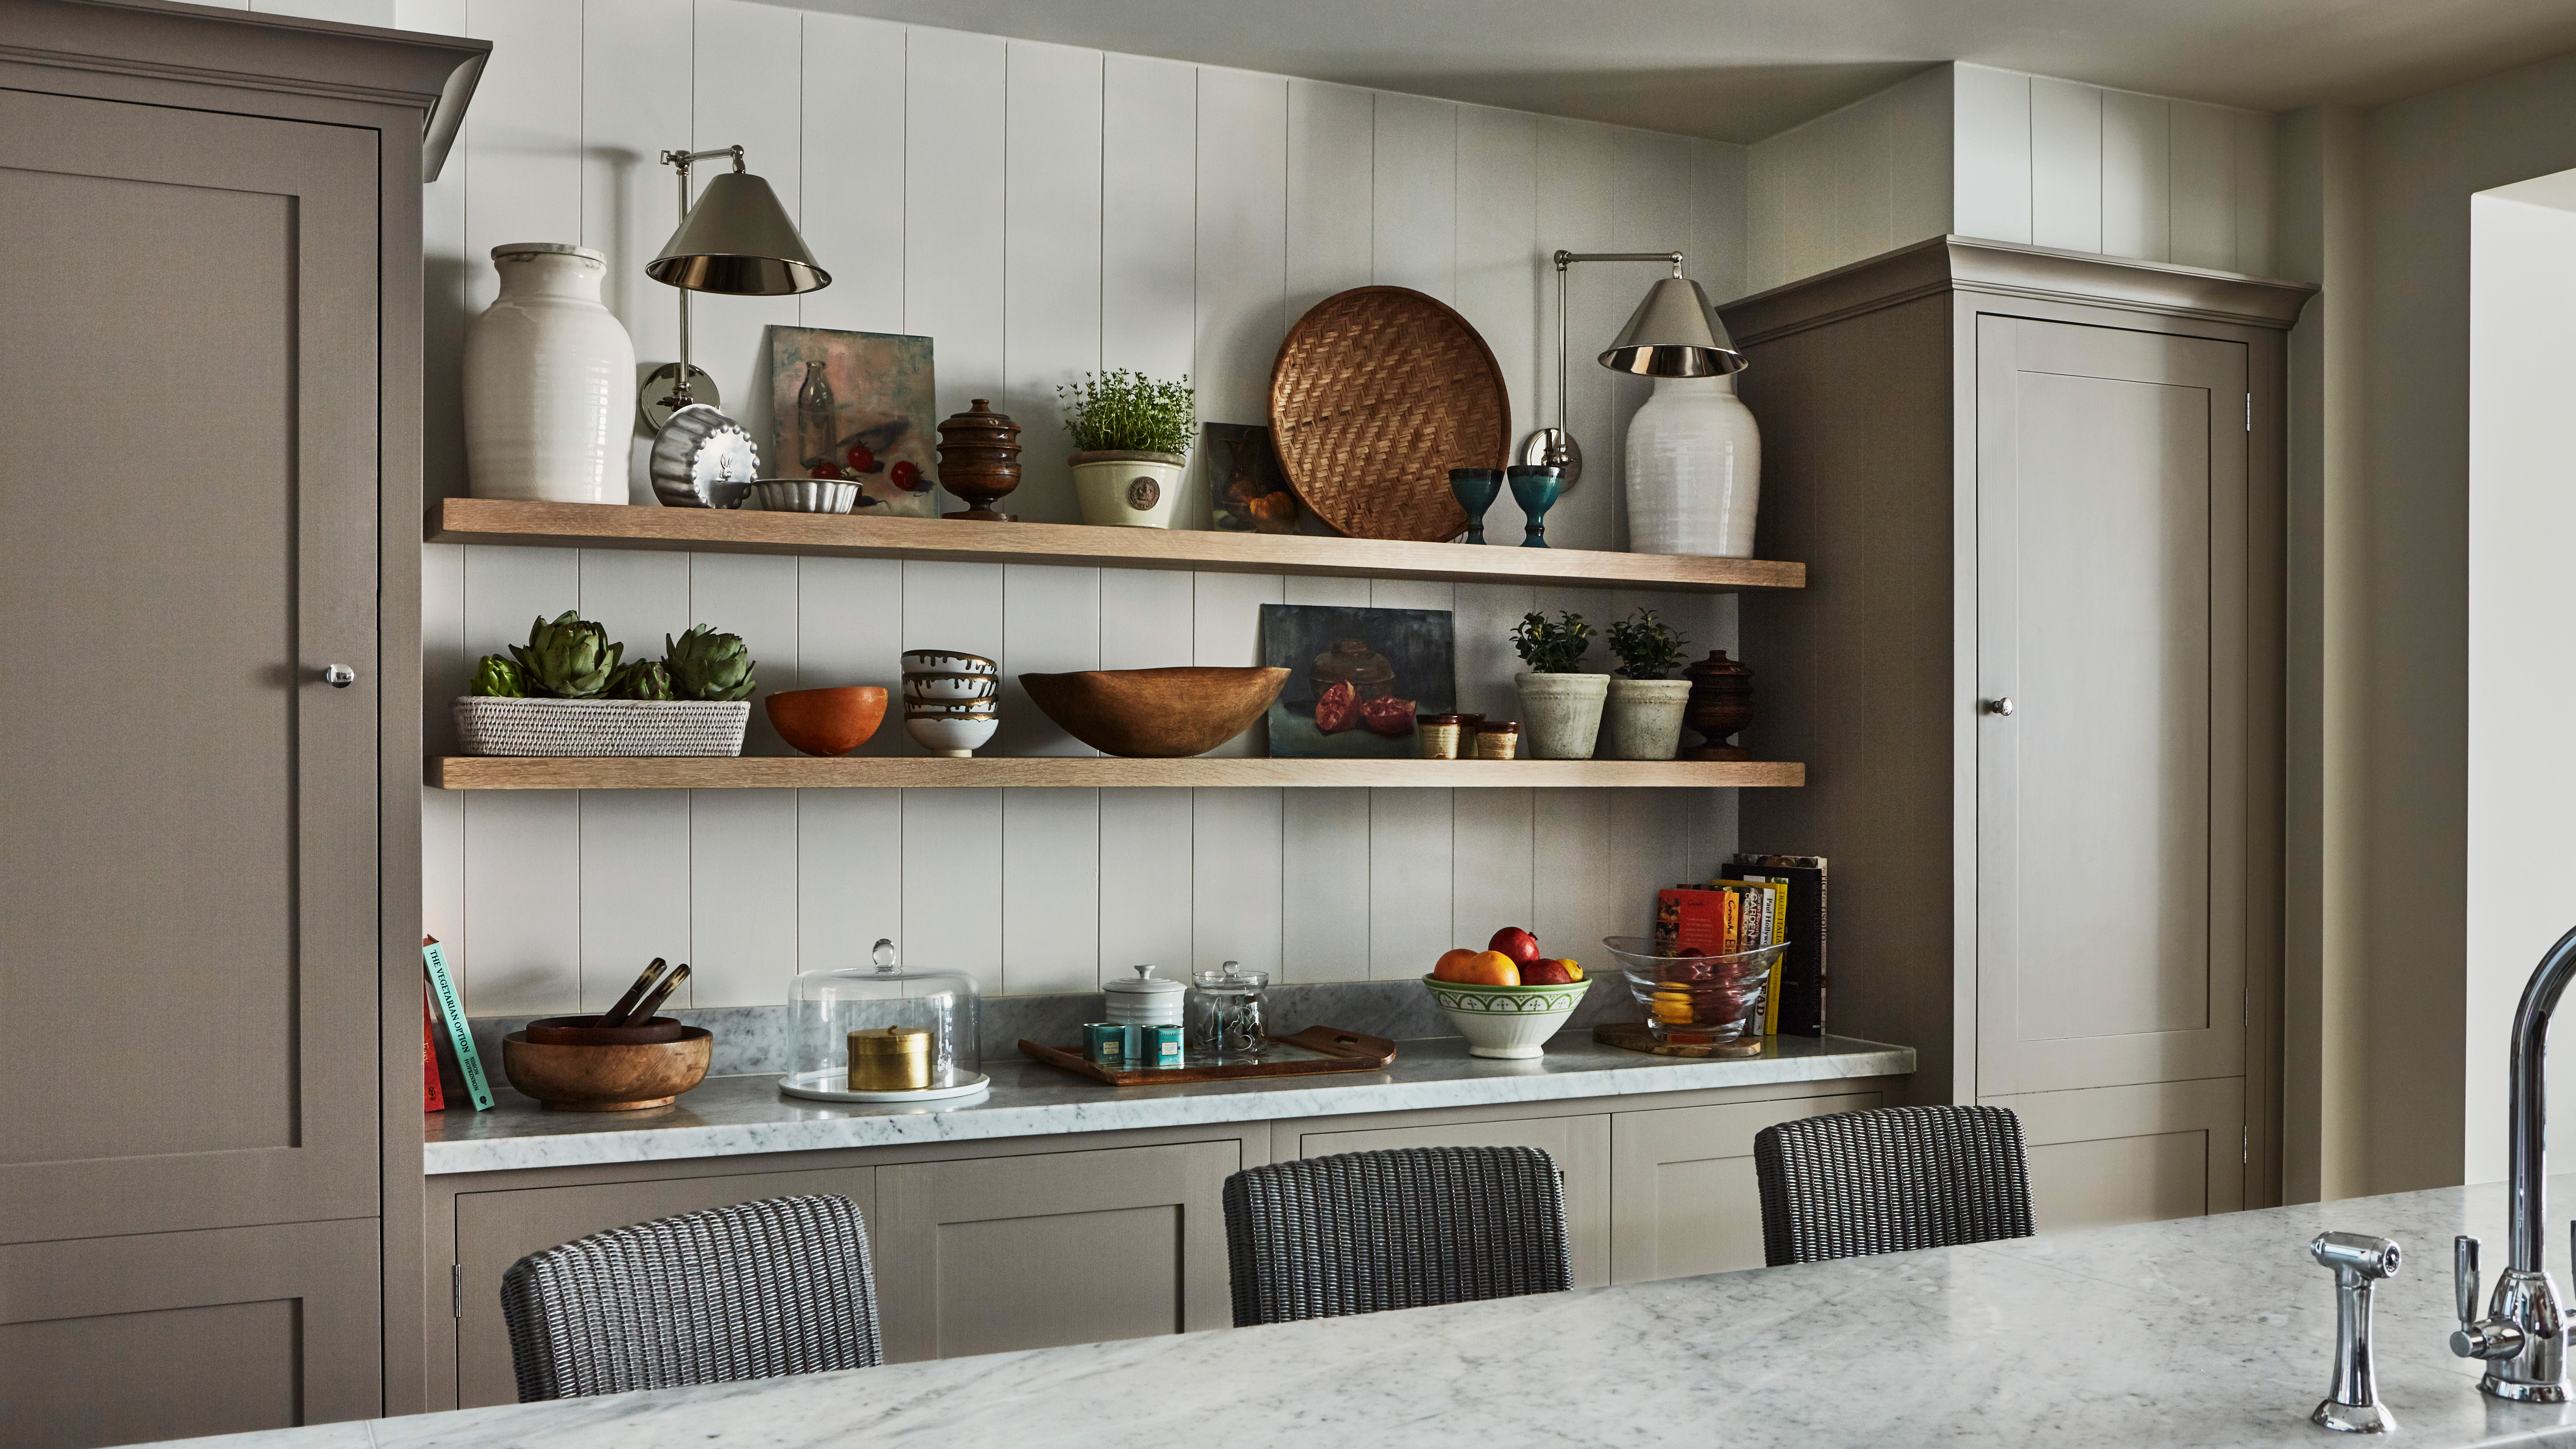 Kitchen Shelving Ideas 14 Ways To, What To Put In Open Kitchen Shelves